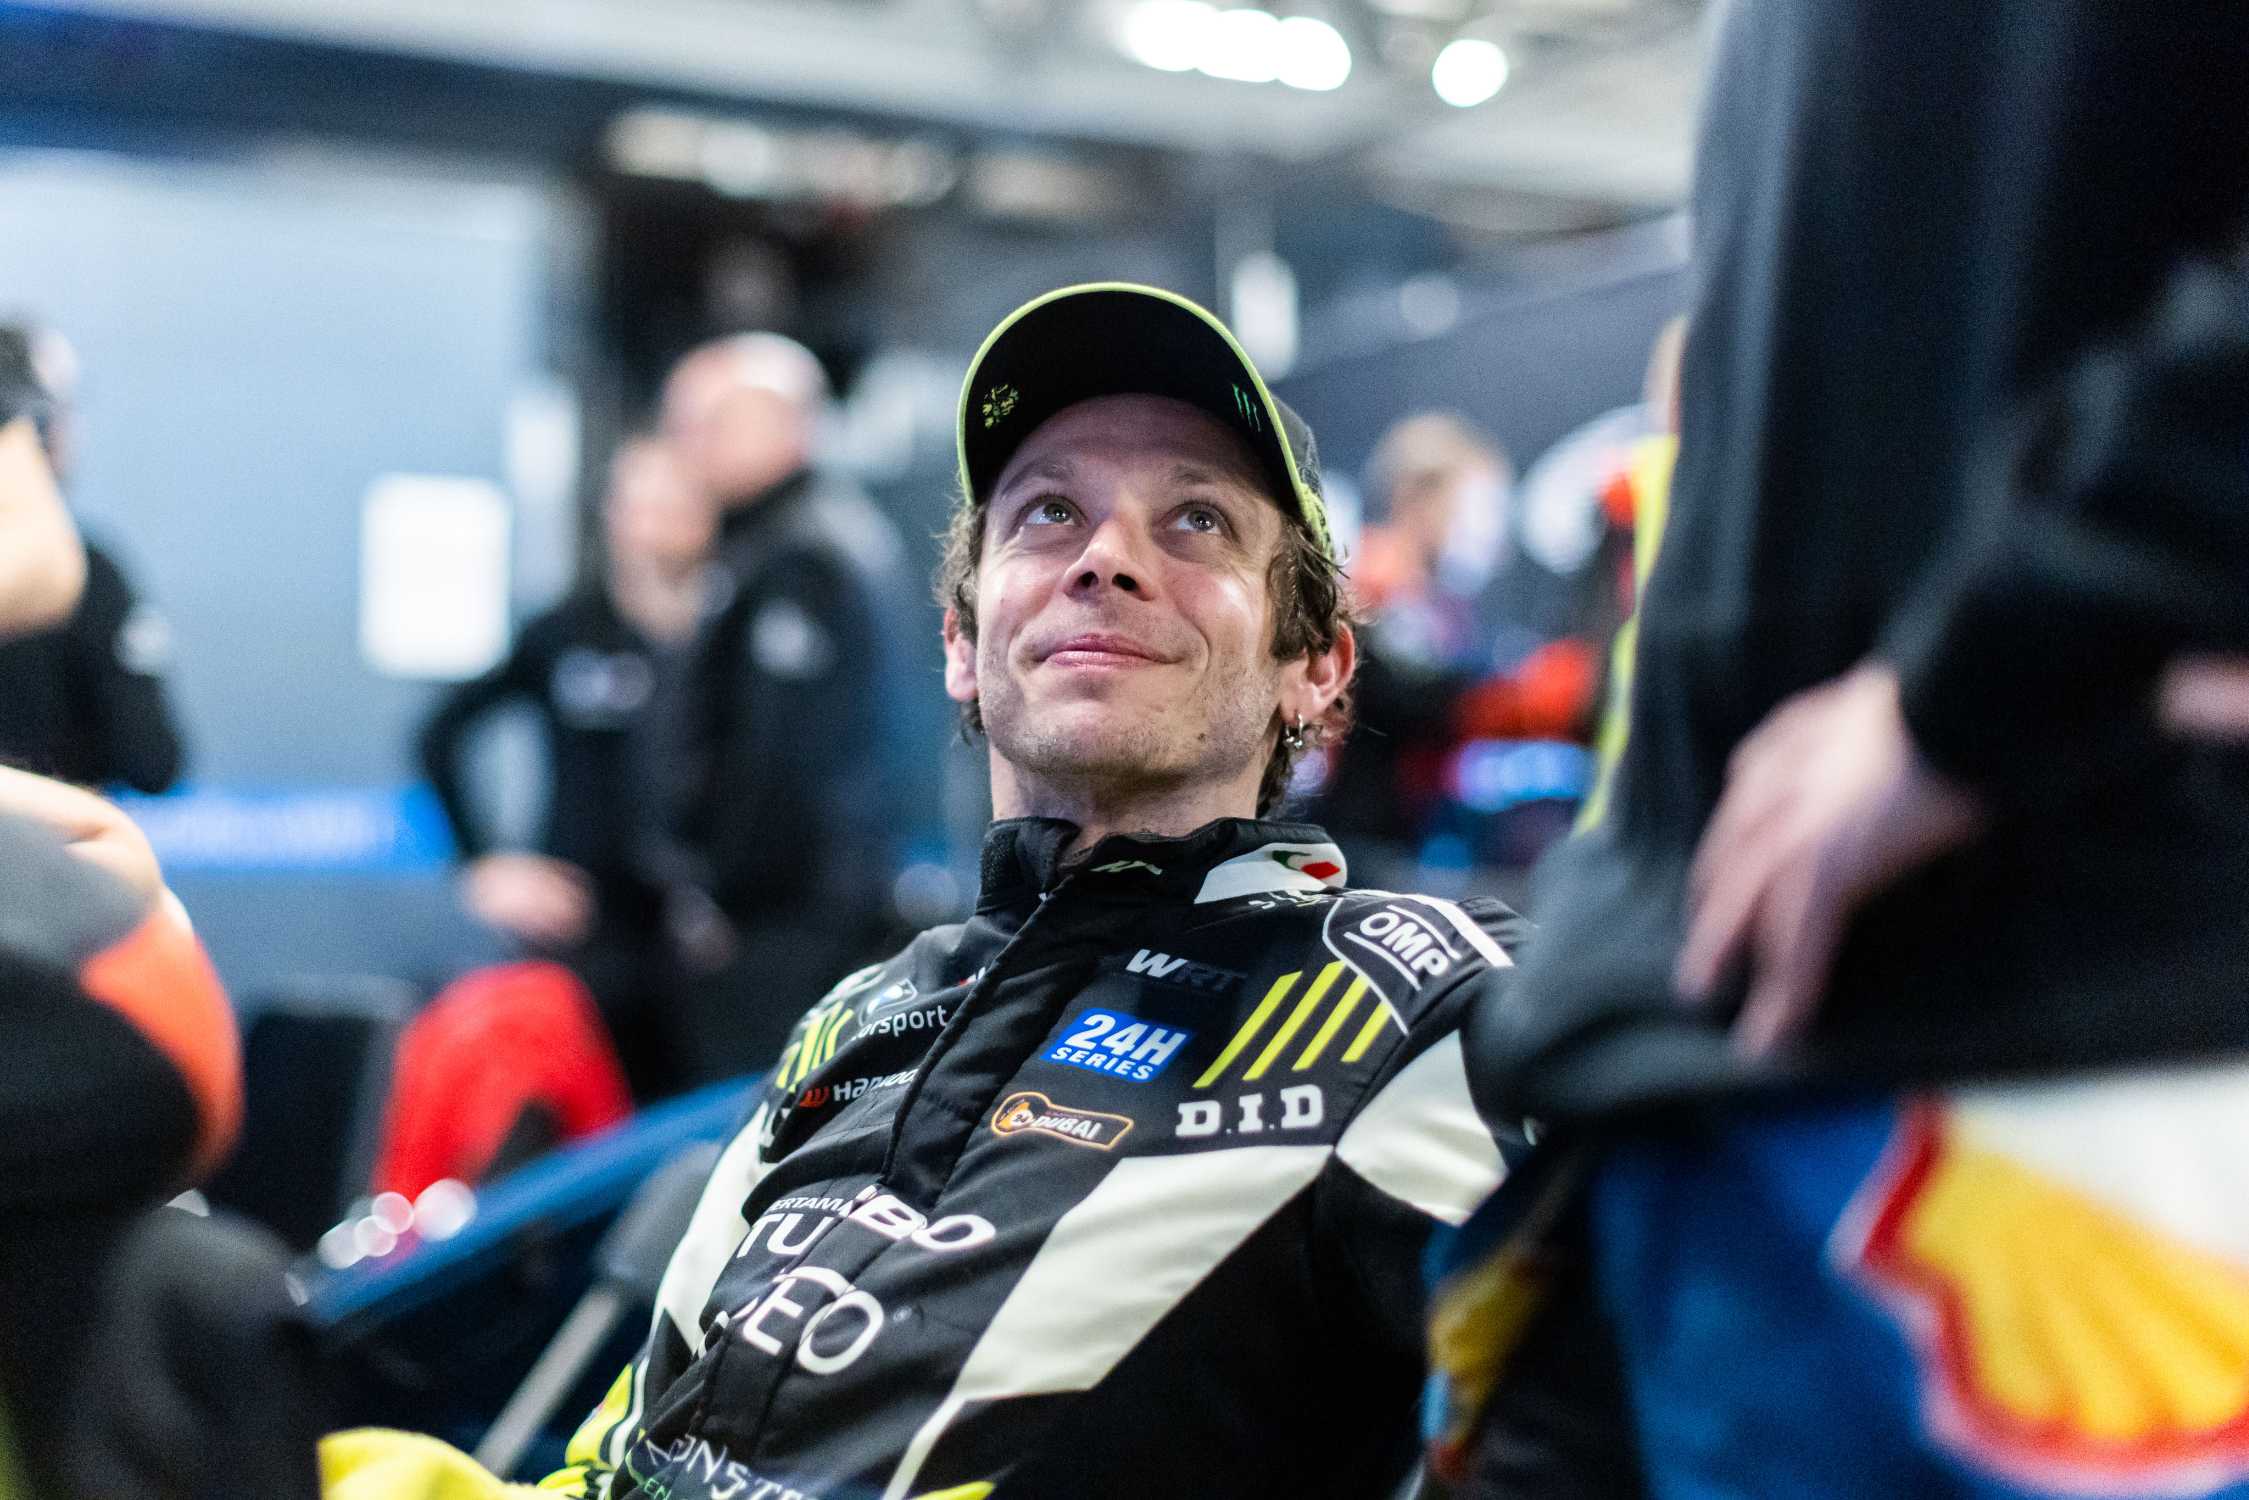 Valentino Rossi to become new member of BMW M Motorsport works